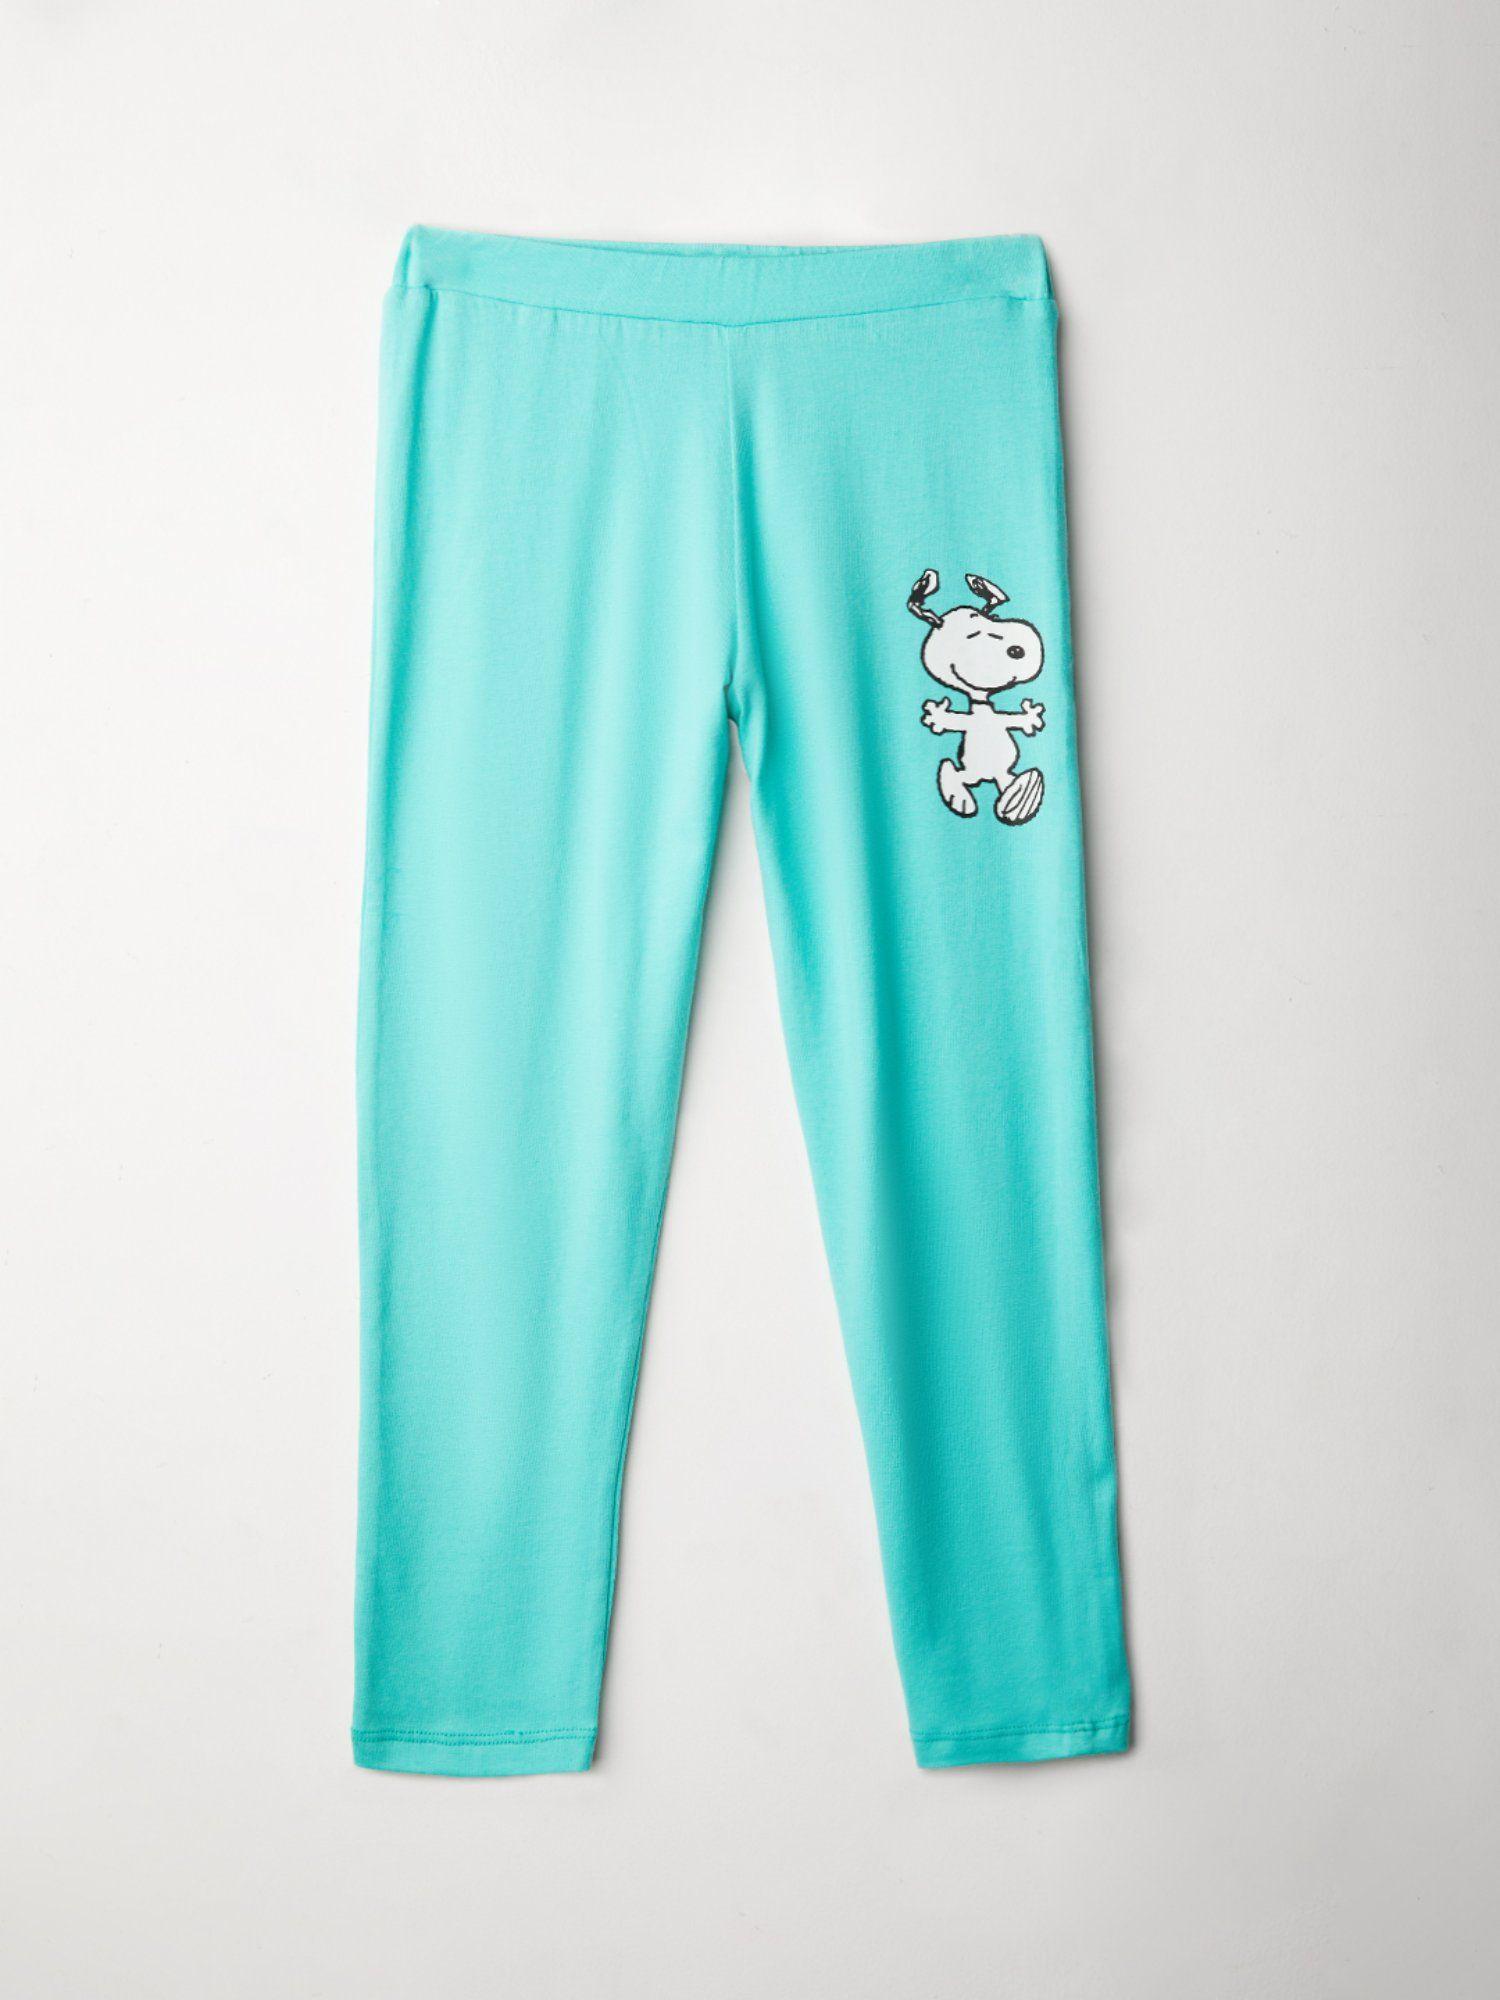 official peanuts: happy snoopy light green color girls leggings